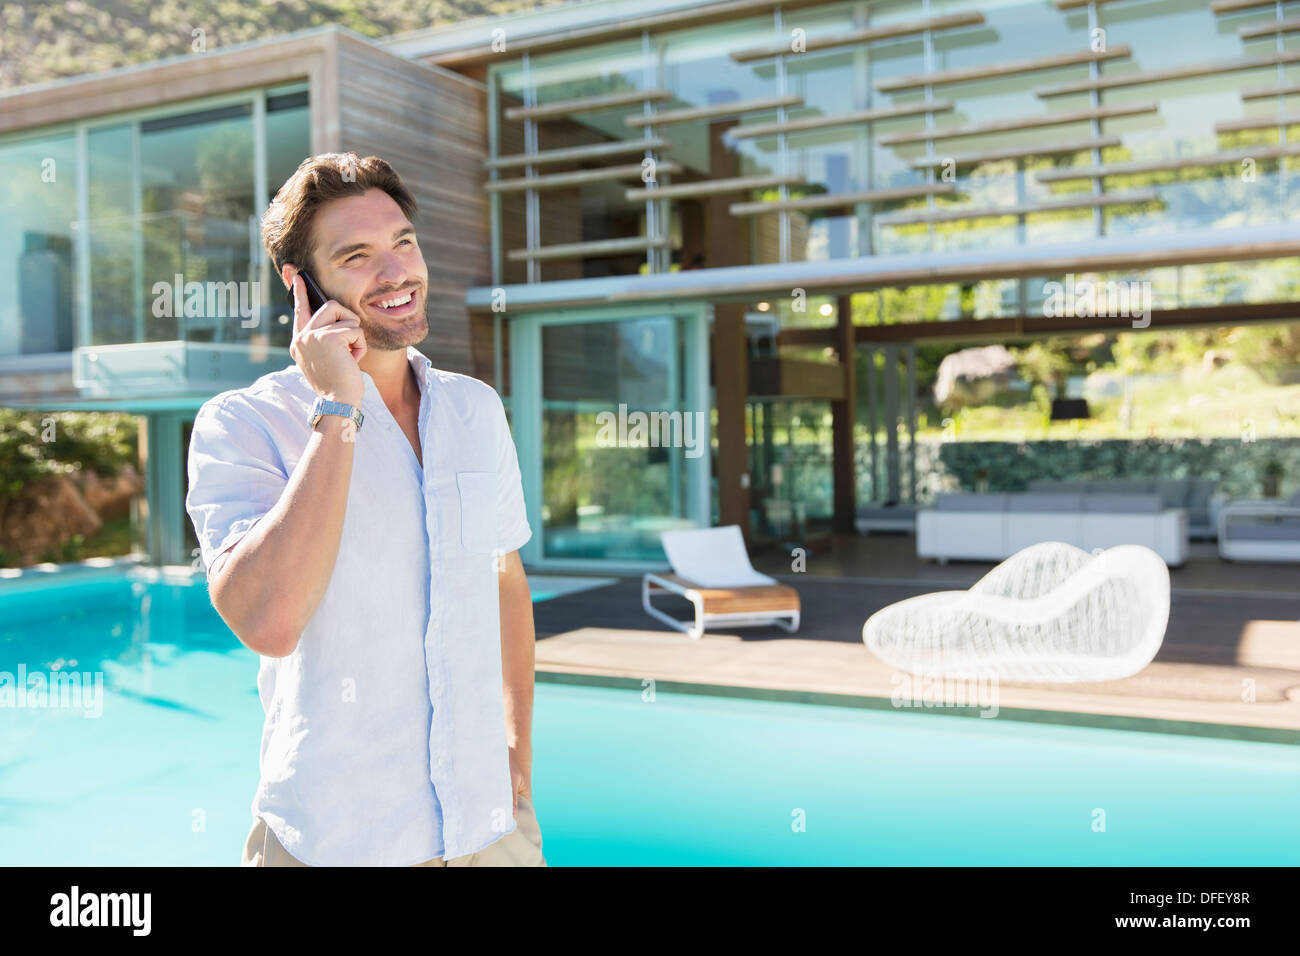 Man talking on cell phone at poolside Stock Photo